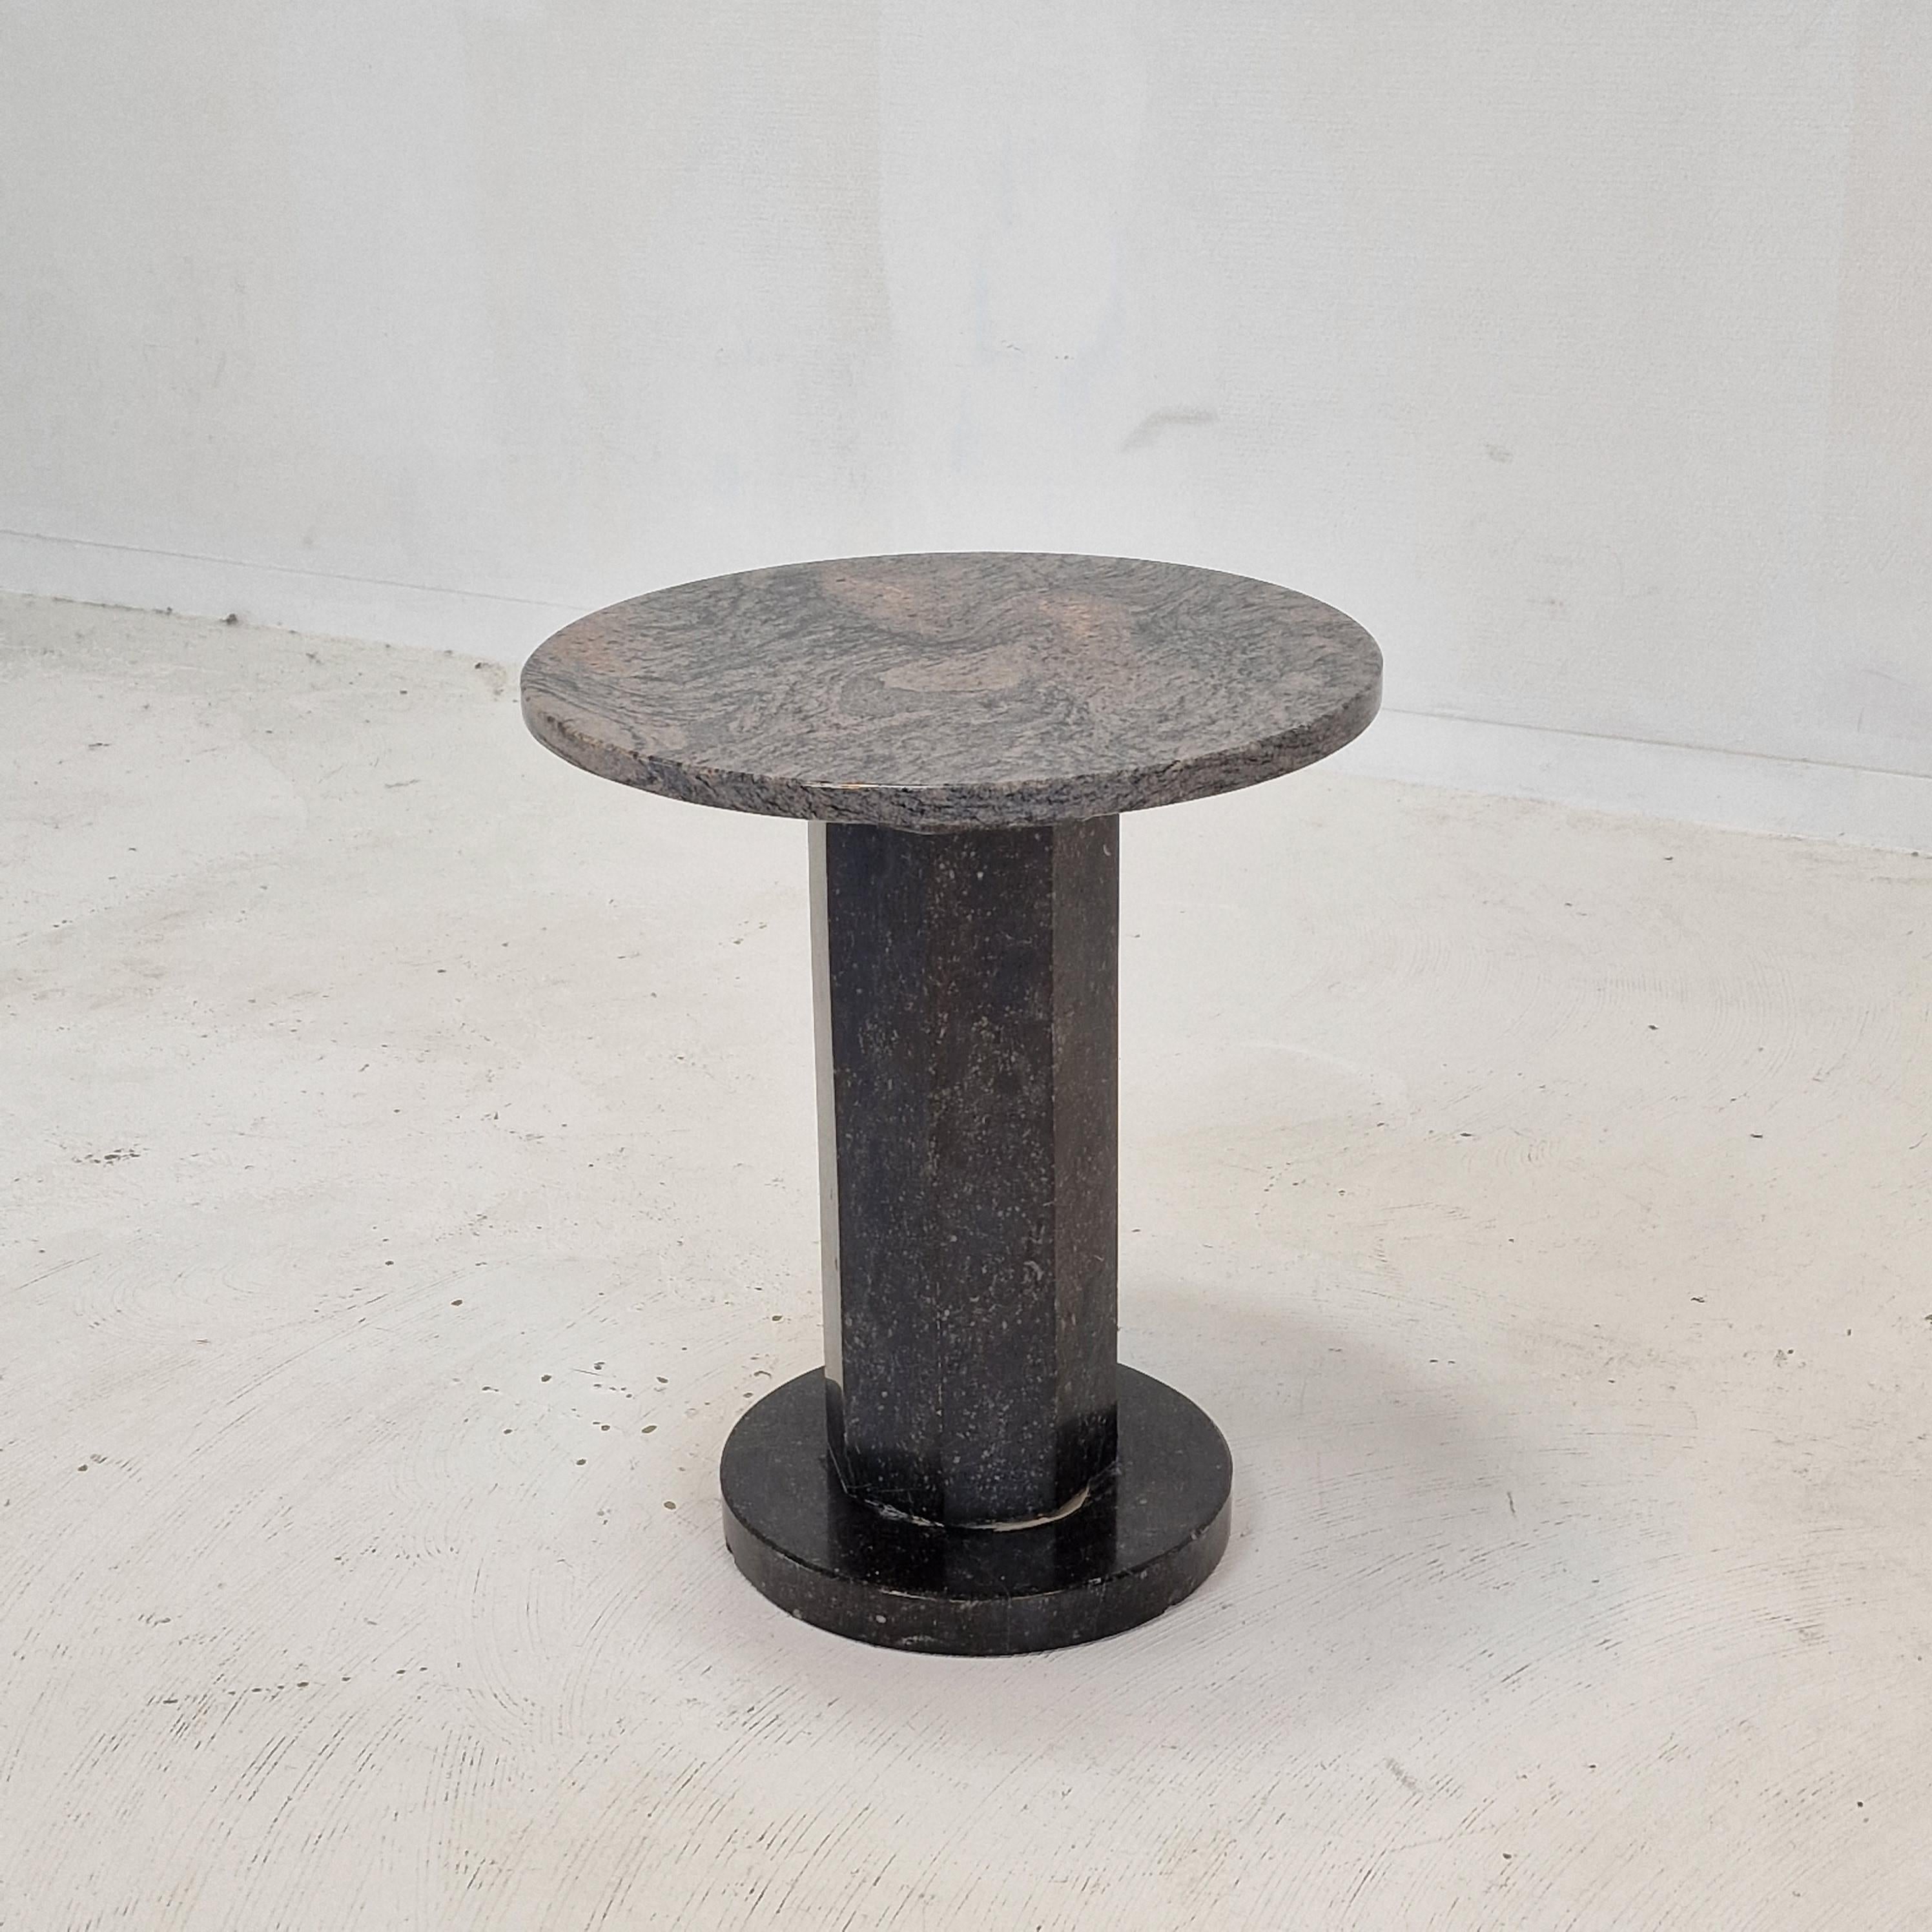 Italian Coffee or Side Table in Granite, 1980s For Sale 2